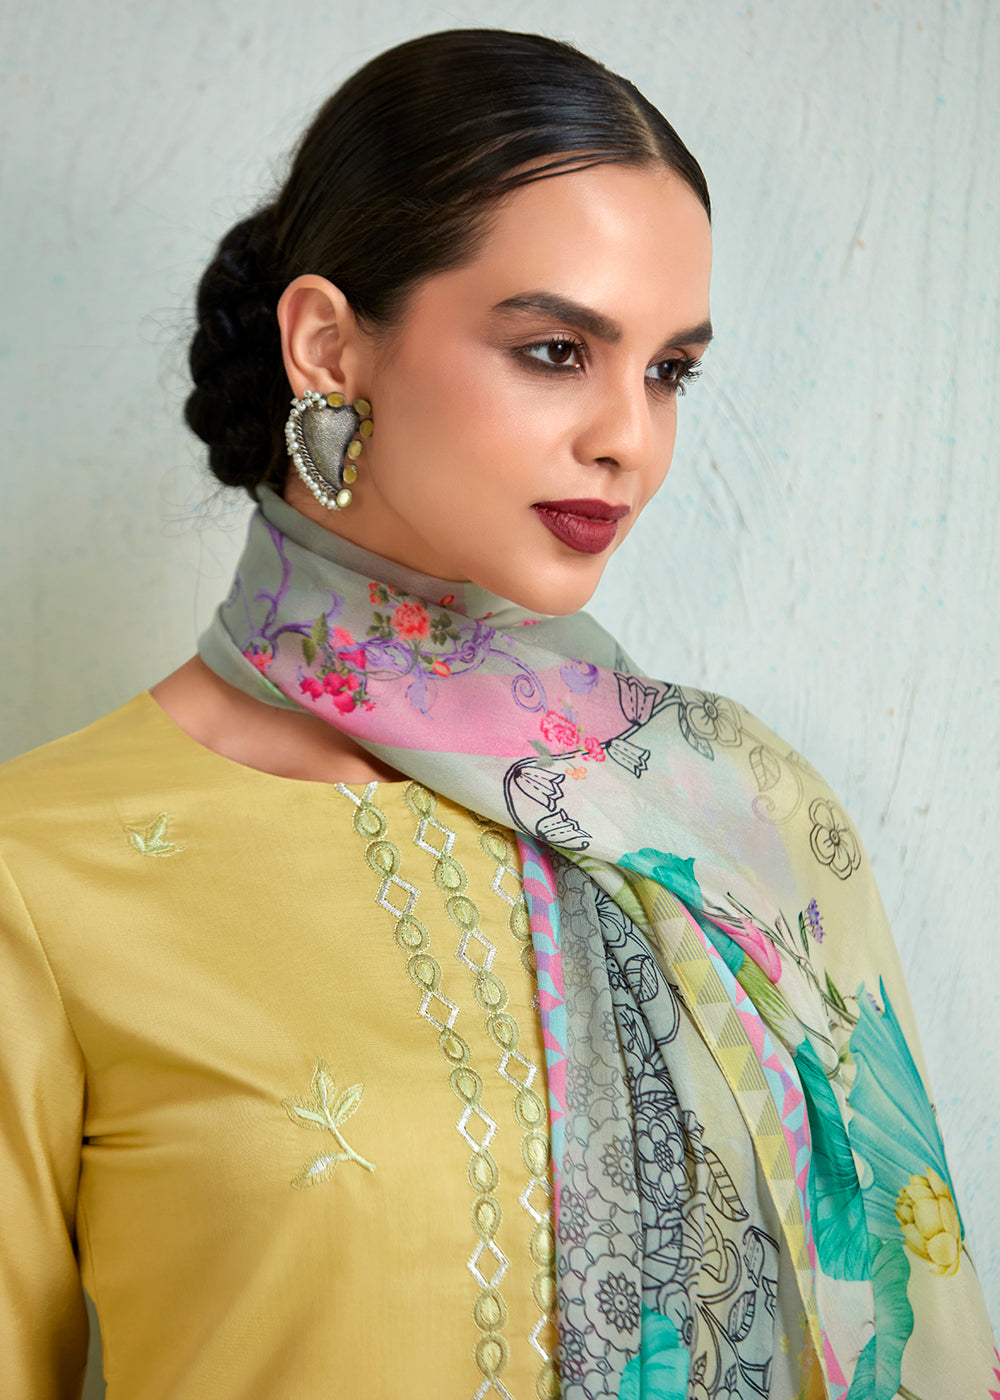 Buy Now Lemon Yellow Pure Muslin Resham Embroidered Salwar Suit Online in USA, UK, Canada, Germany, Australia & Worldwide at Empress Clothing. 